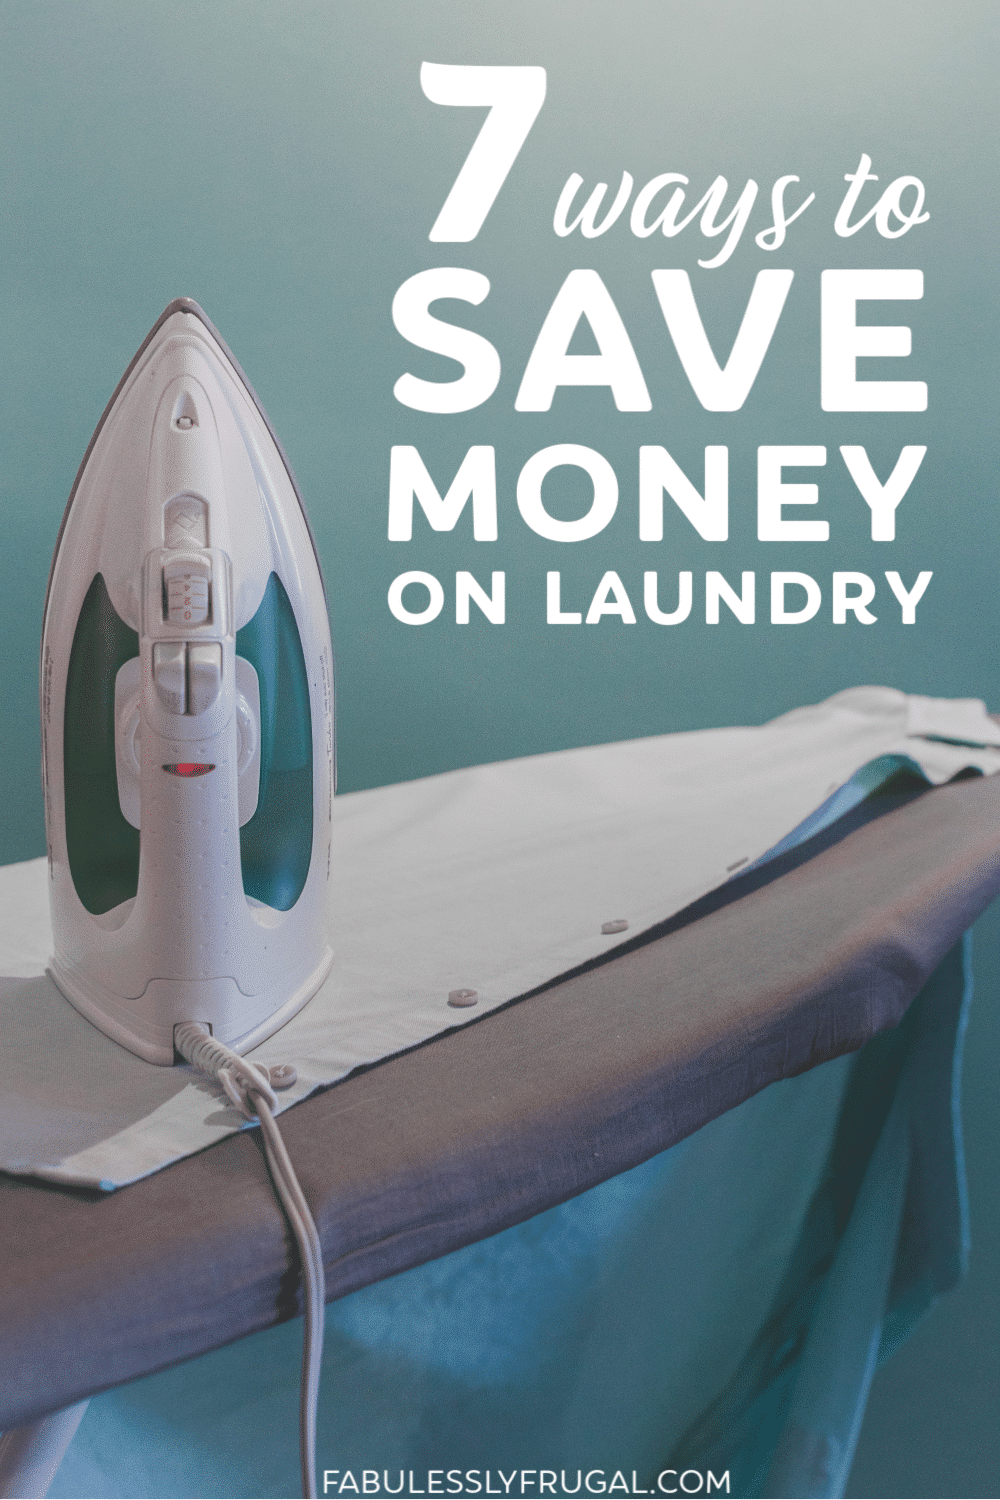 How to save money on laundry